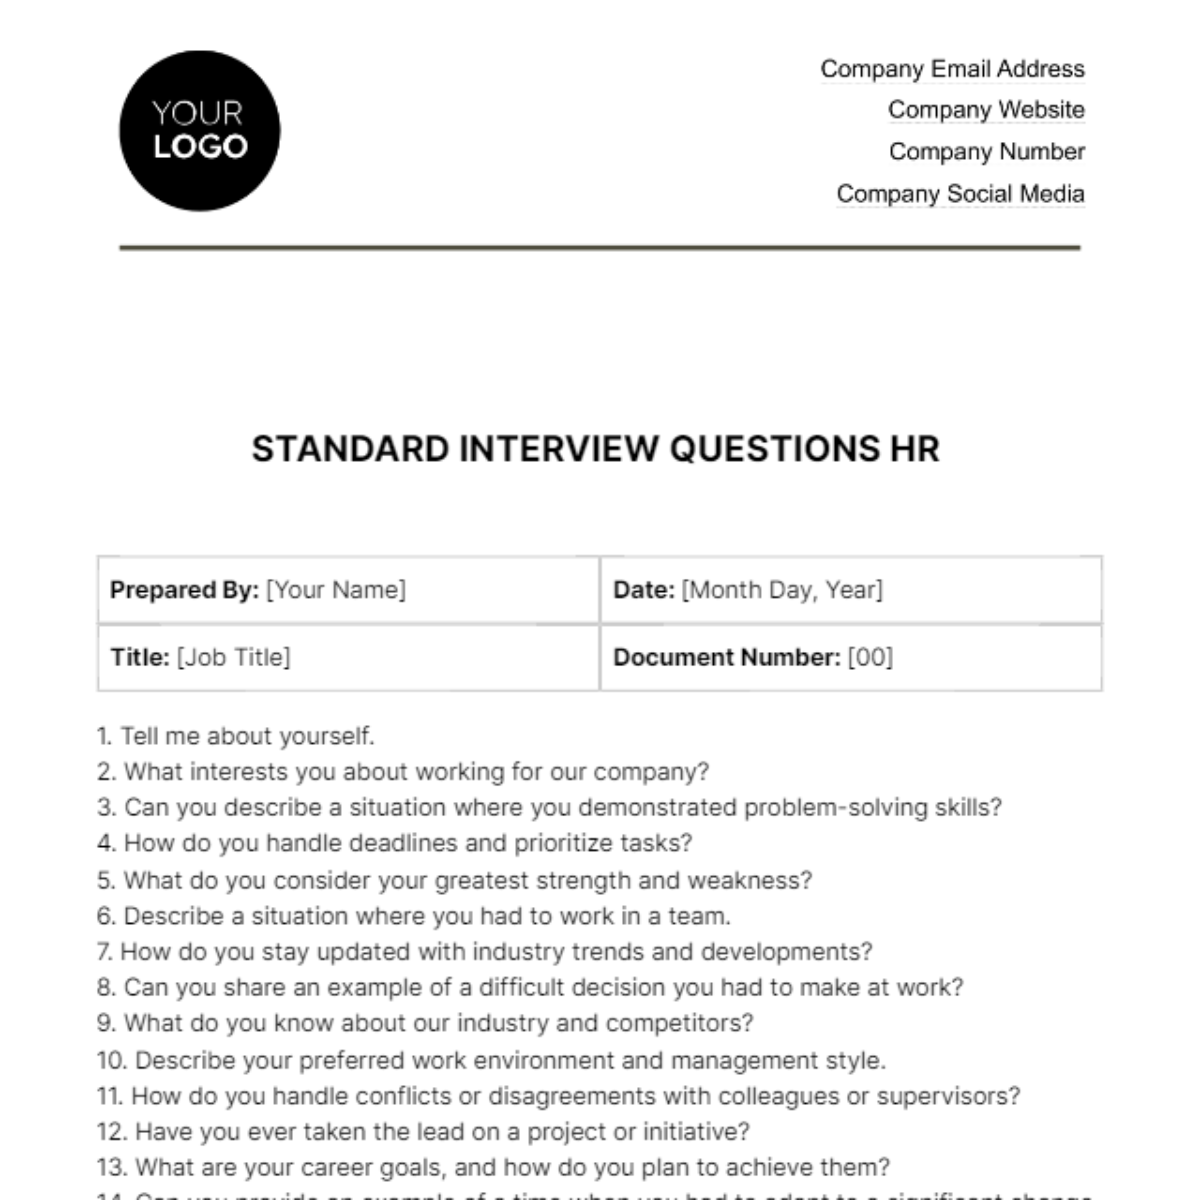 Free Standard Interview Questions HR Template in Word, Google Docs, PDF